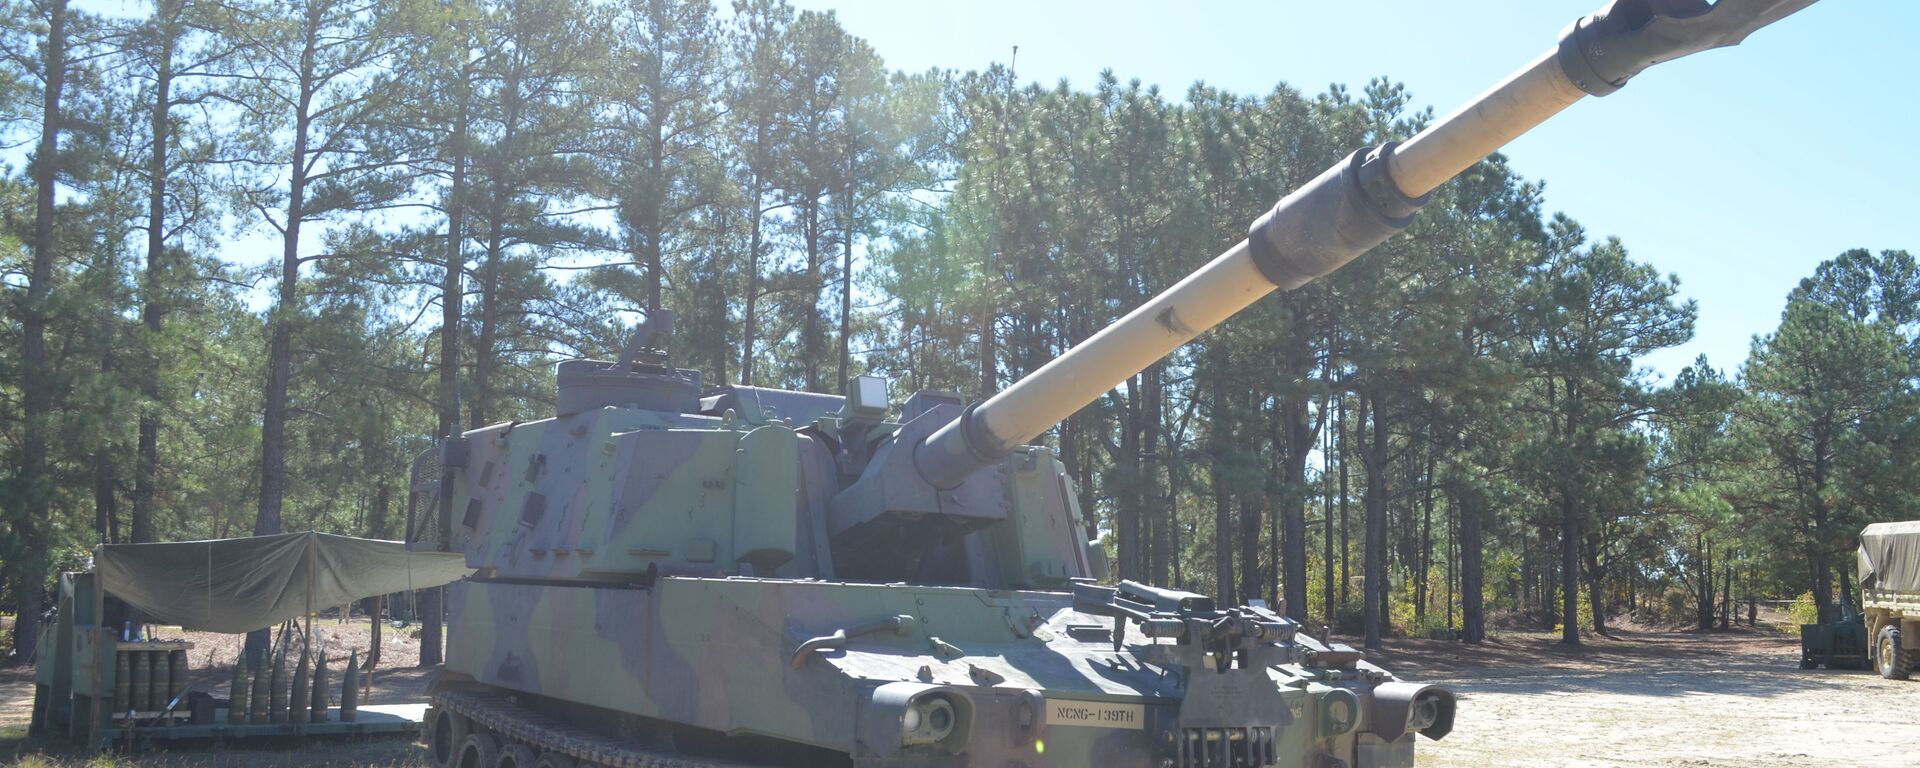 The M109 Paladin Self-Propelled Howitzer standing ready deep in the southern training areas at Fort Bragg. Nine National Guard troops from North and South Carolina, Florida, Georgia, Mississippi, Illinois and New Jersey are attending the 13 Bravo artillery military occupational specialty (MOS) reclassification course and will learn how to be a crew member on the three main “cannon” artillery weapons systems in the U.S. Army: The M119A3 105mm light towed howitzer, M777A2 155mm medium towed howitzer and the M109A6 Paladin 155mm self-propelled howitzer. Over the course of two days in the field, students will fire hundreds of rounds from all three weapons. - Sputnik International, 1920, 02.05.2022